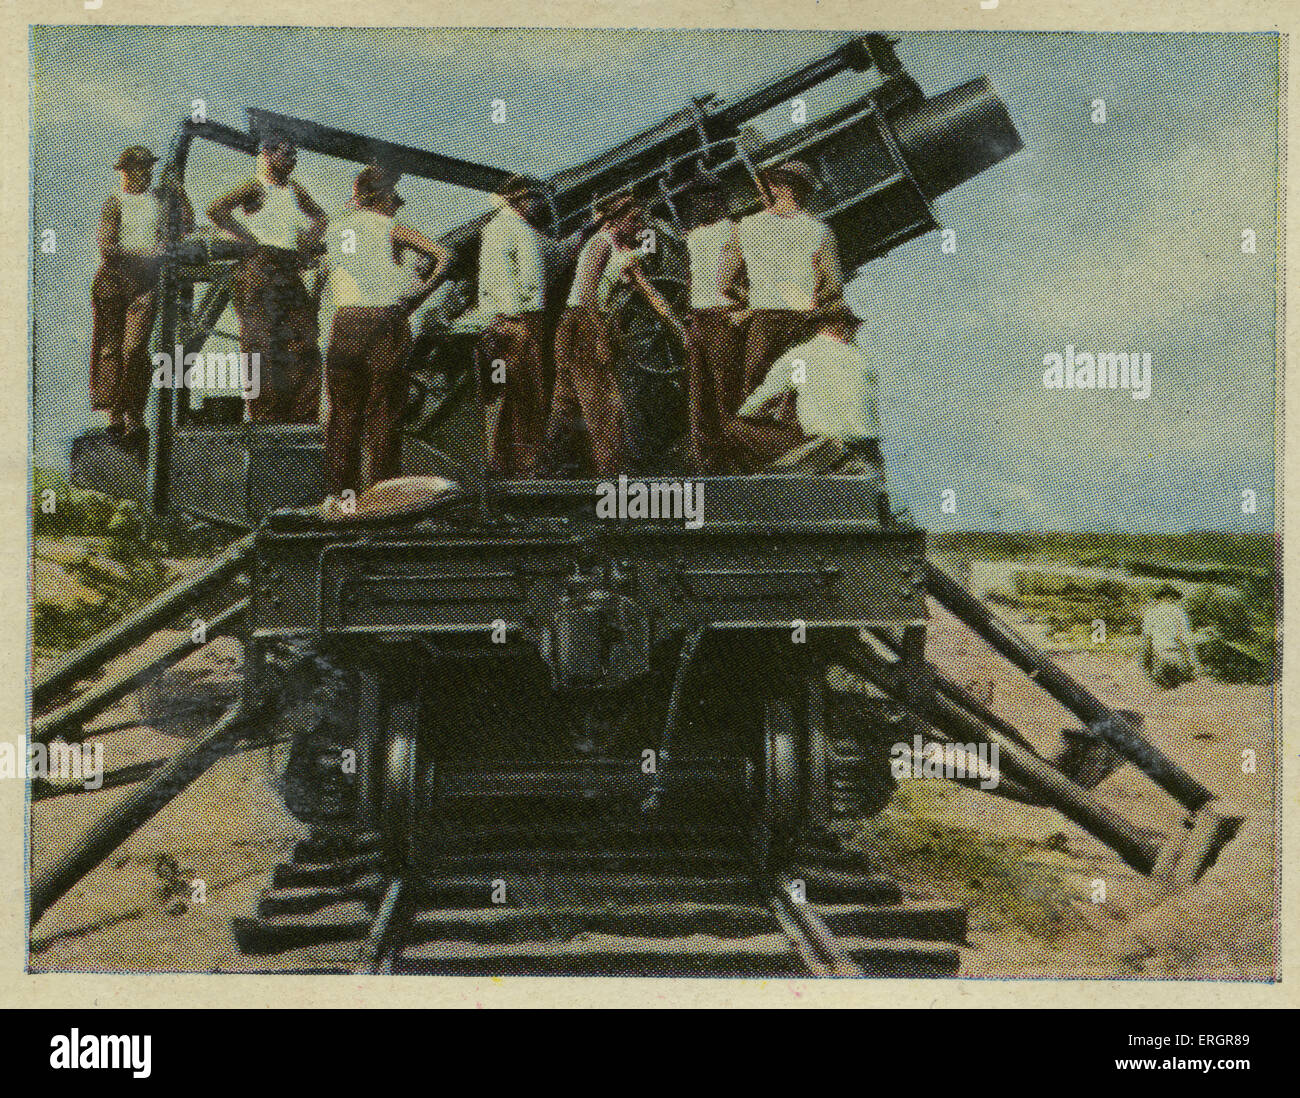 Heavy American railway howitzer gun firing in exercise (Source: Cigarette cards published in Germany c.1934 reviewing military equipment in arms race prior to WW2) Stock Photo